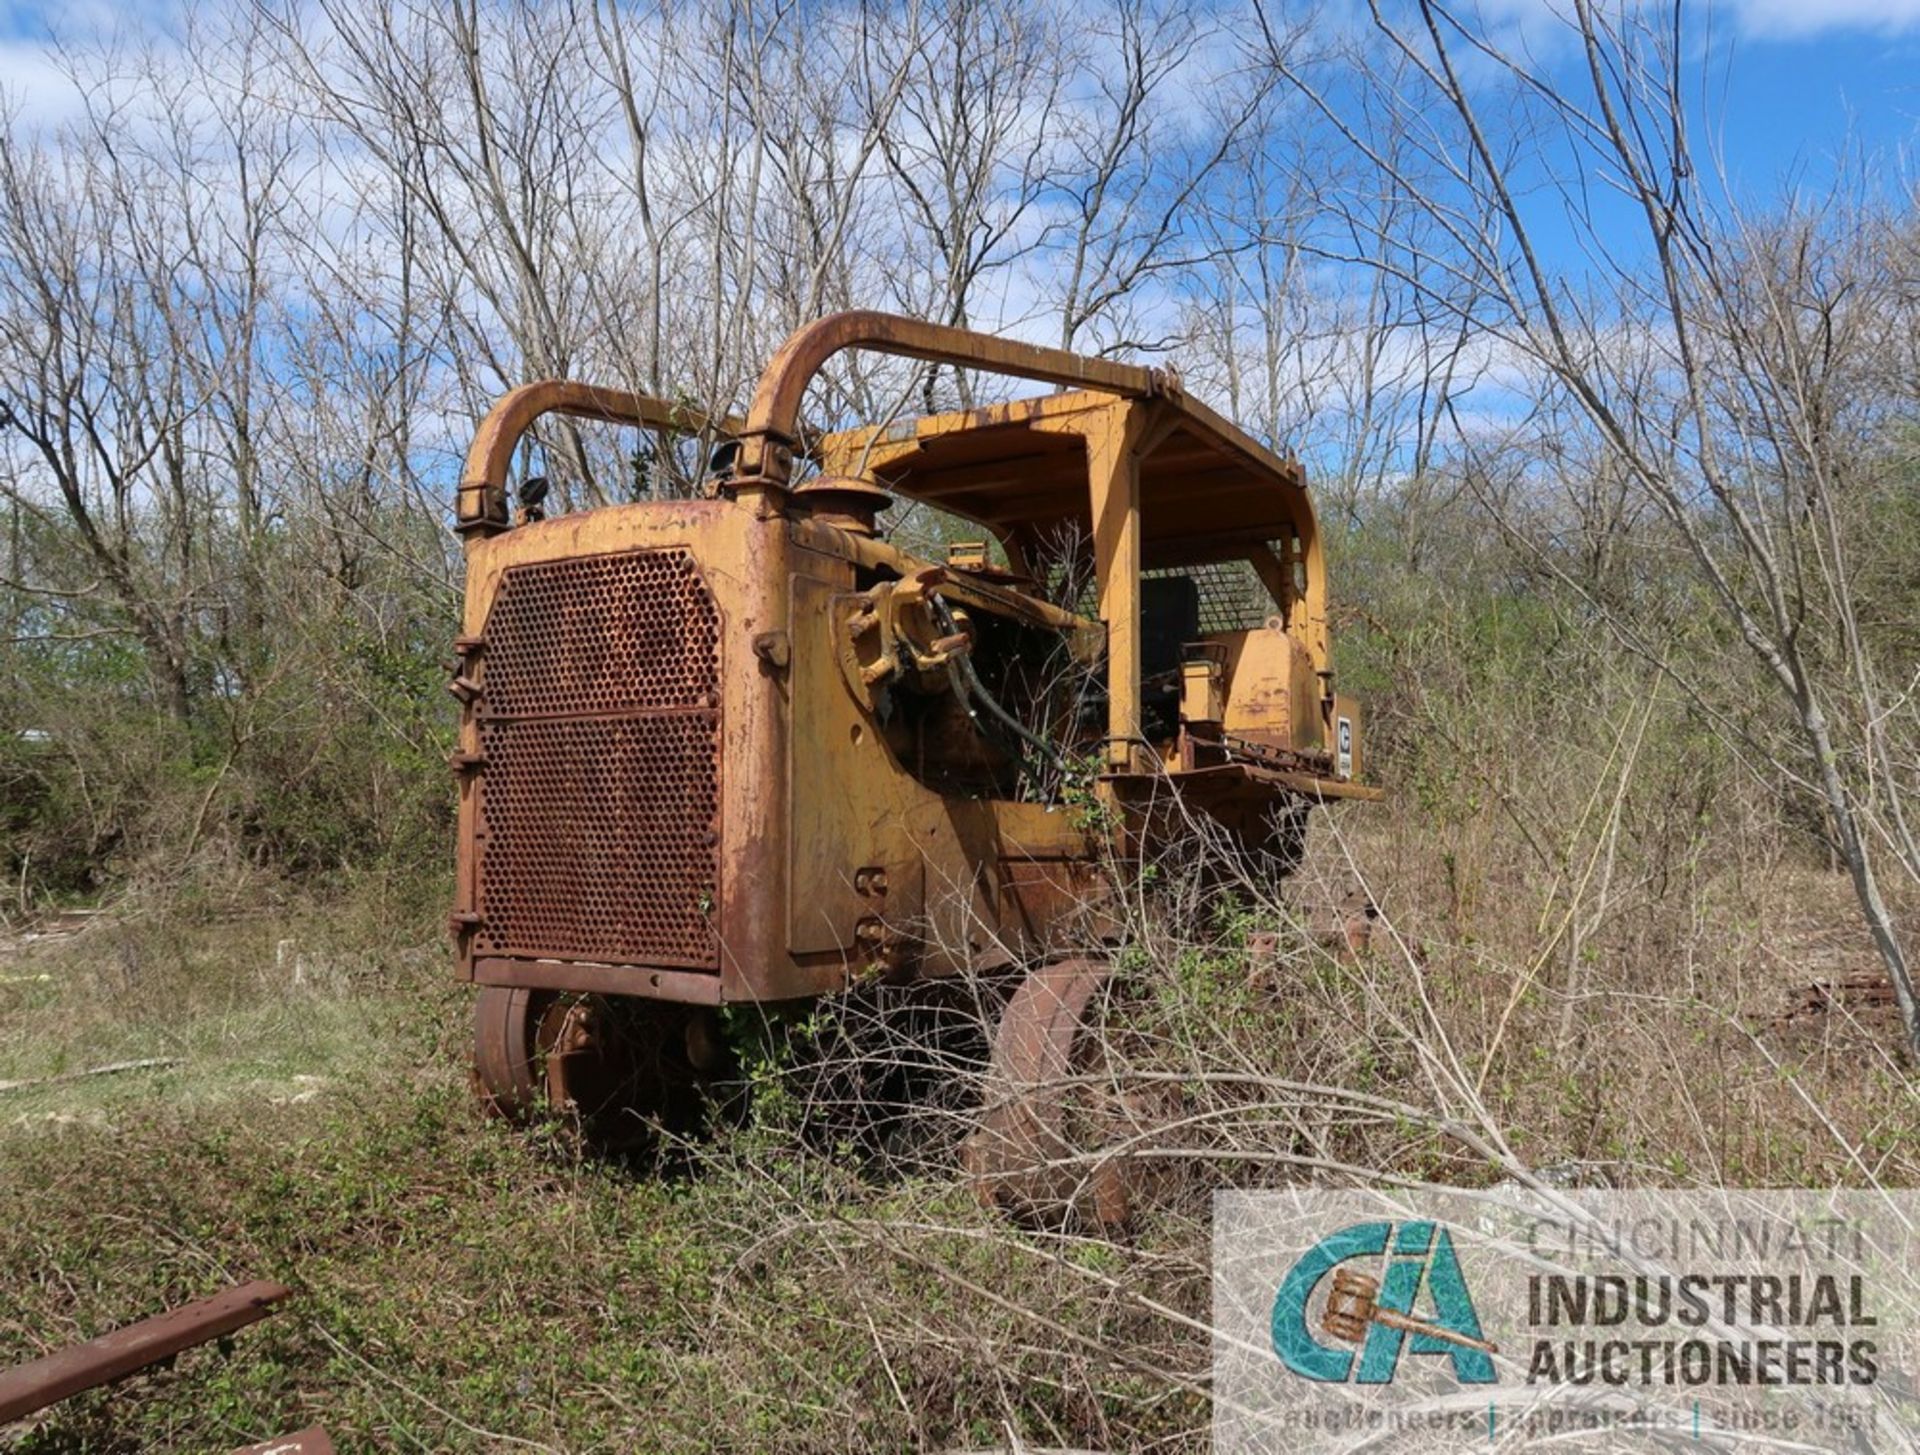 CATERPILLAR MODEL D8H PARTED-OUT CRAWLER DOZIER; S/N N/A, PARTS ONLY DOZIER **LOCATED AT 900 LICKING - Image 5 of 5